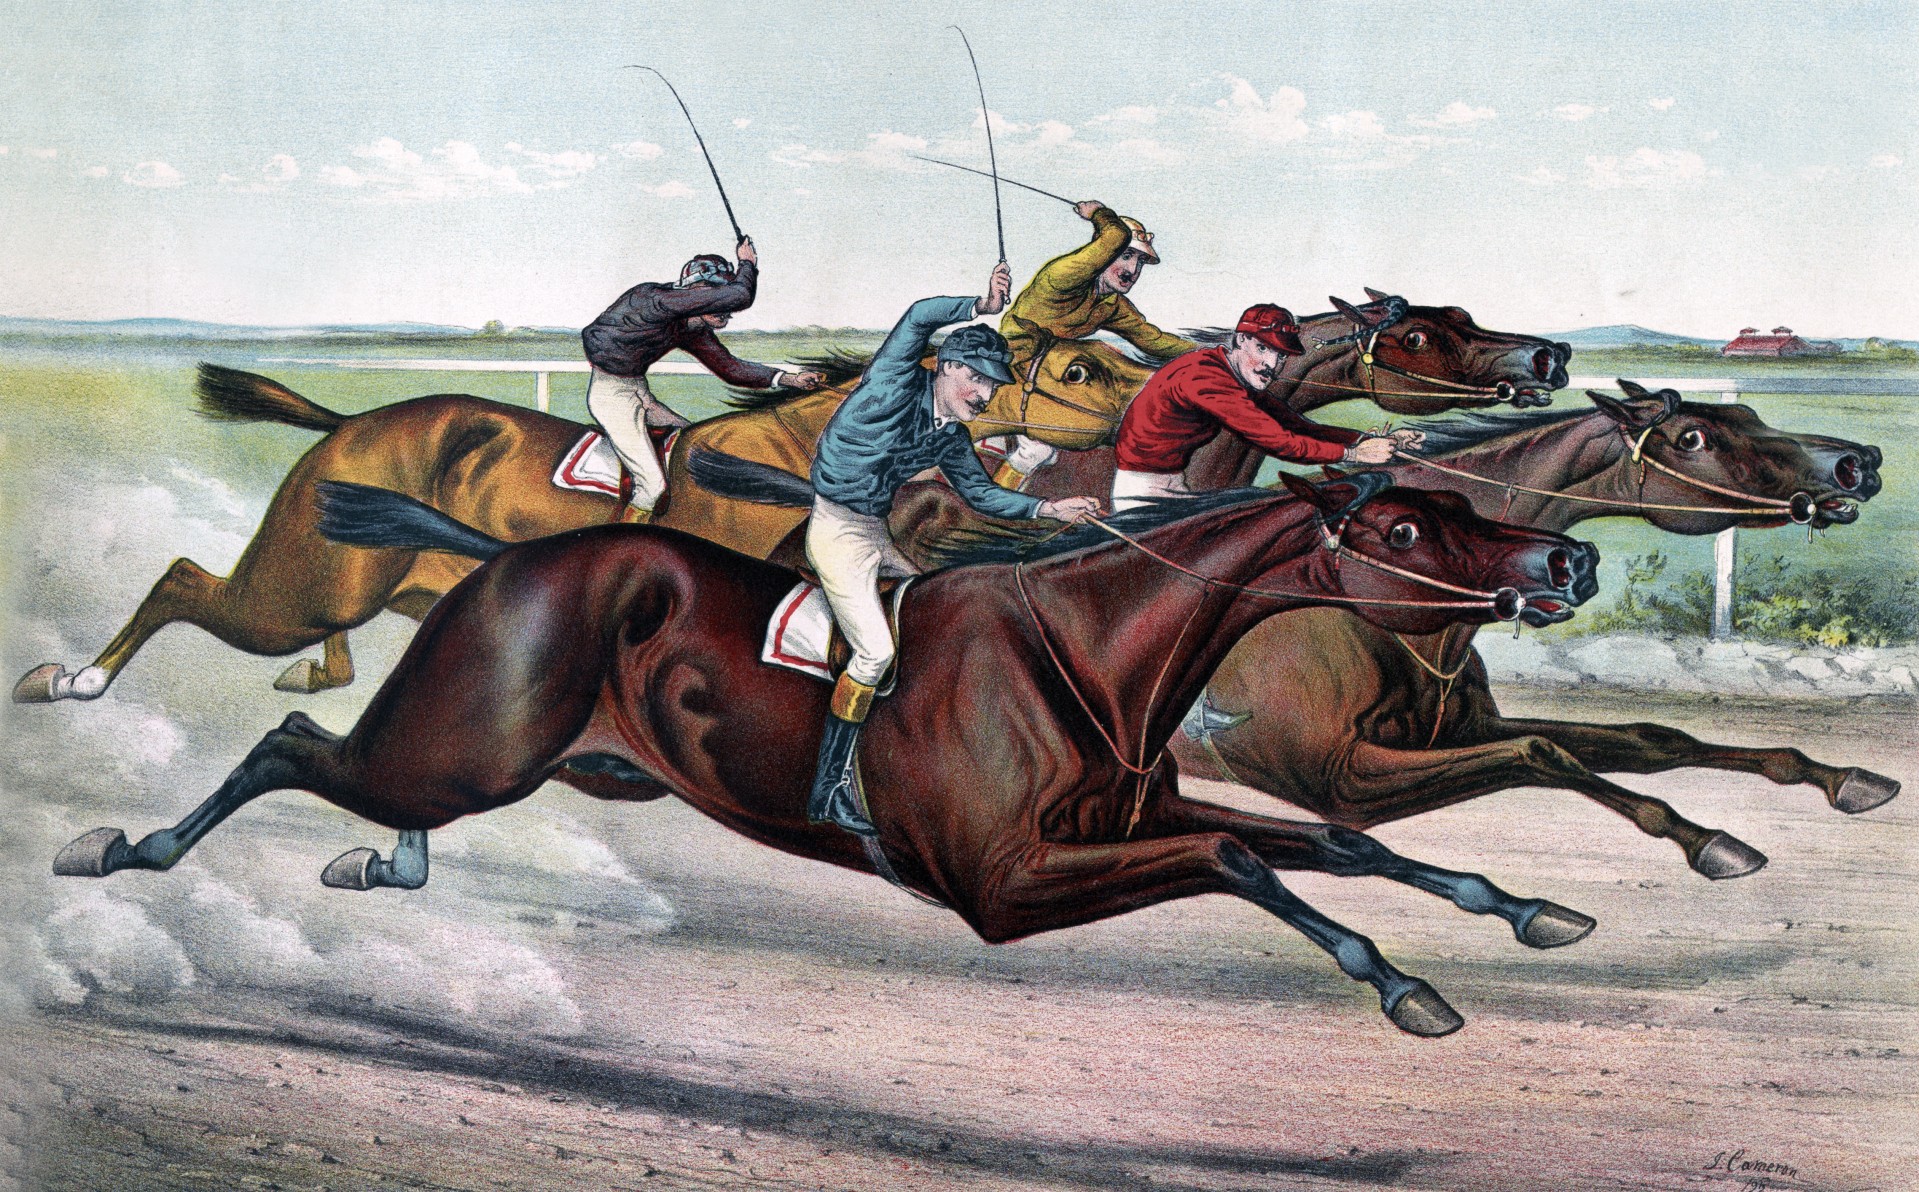 Public domain vintage painting of horses racing